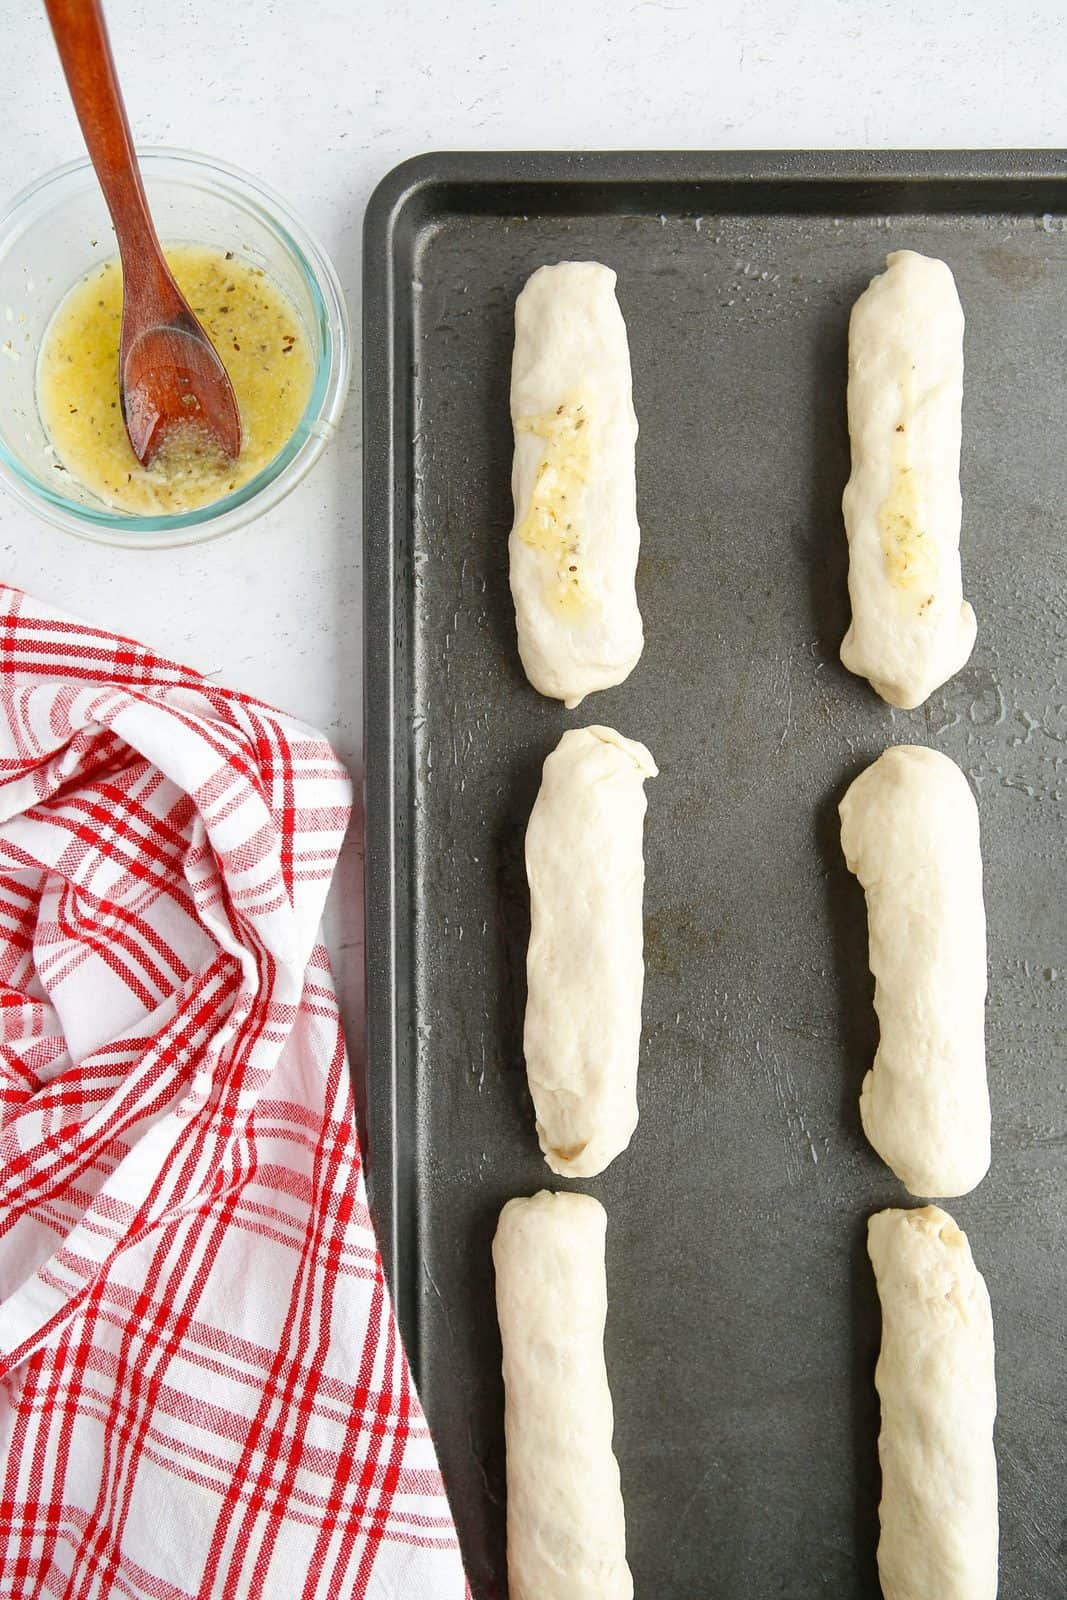 Wrapped up Pizza Roll Breadsticks on baking sheet brushed with garlic butter sauce.